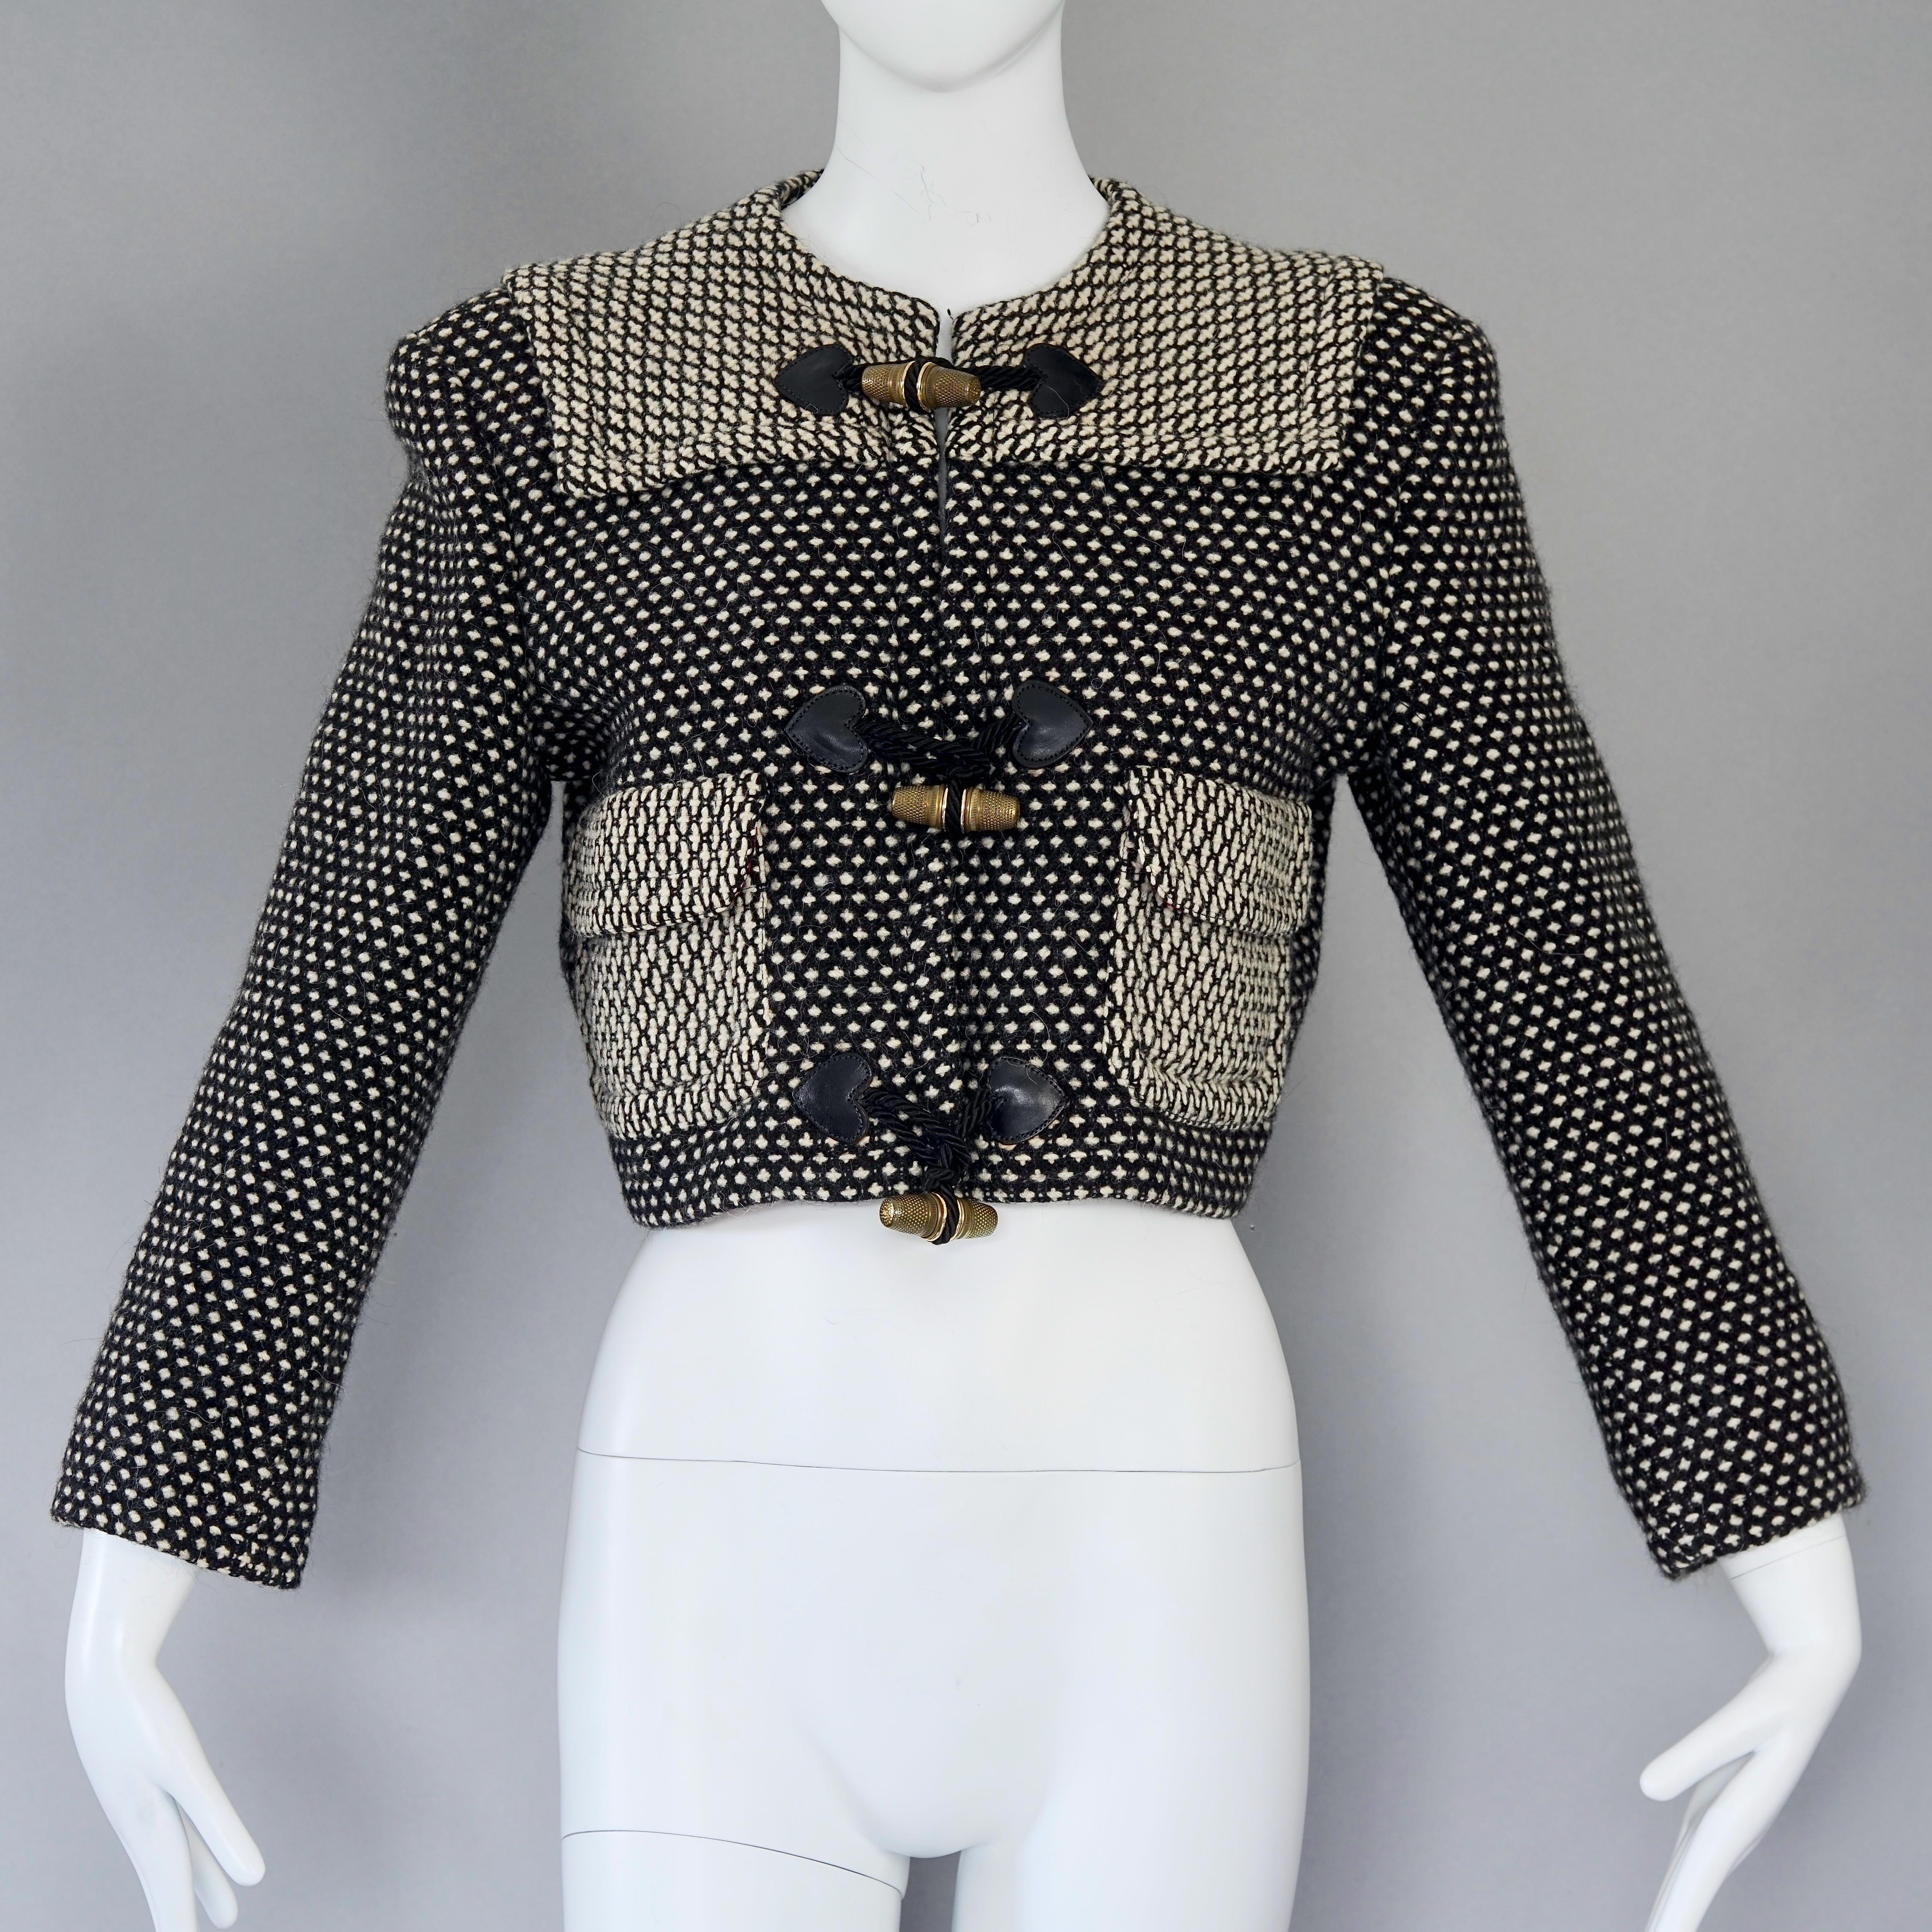 Vintage MOSCHINO Thimble Button Black White Woven Alpaca Blend Cropped Jacket

Measurements taken laid flat, please double bust and waist:
Shoulder: 18.11 inches (46 cm)
Sleeves: 20.47 Inches (52 cm)
Bust: 20.07 inches (51 cm)
Waist: 16.92 inches